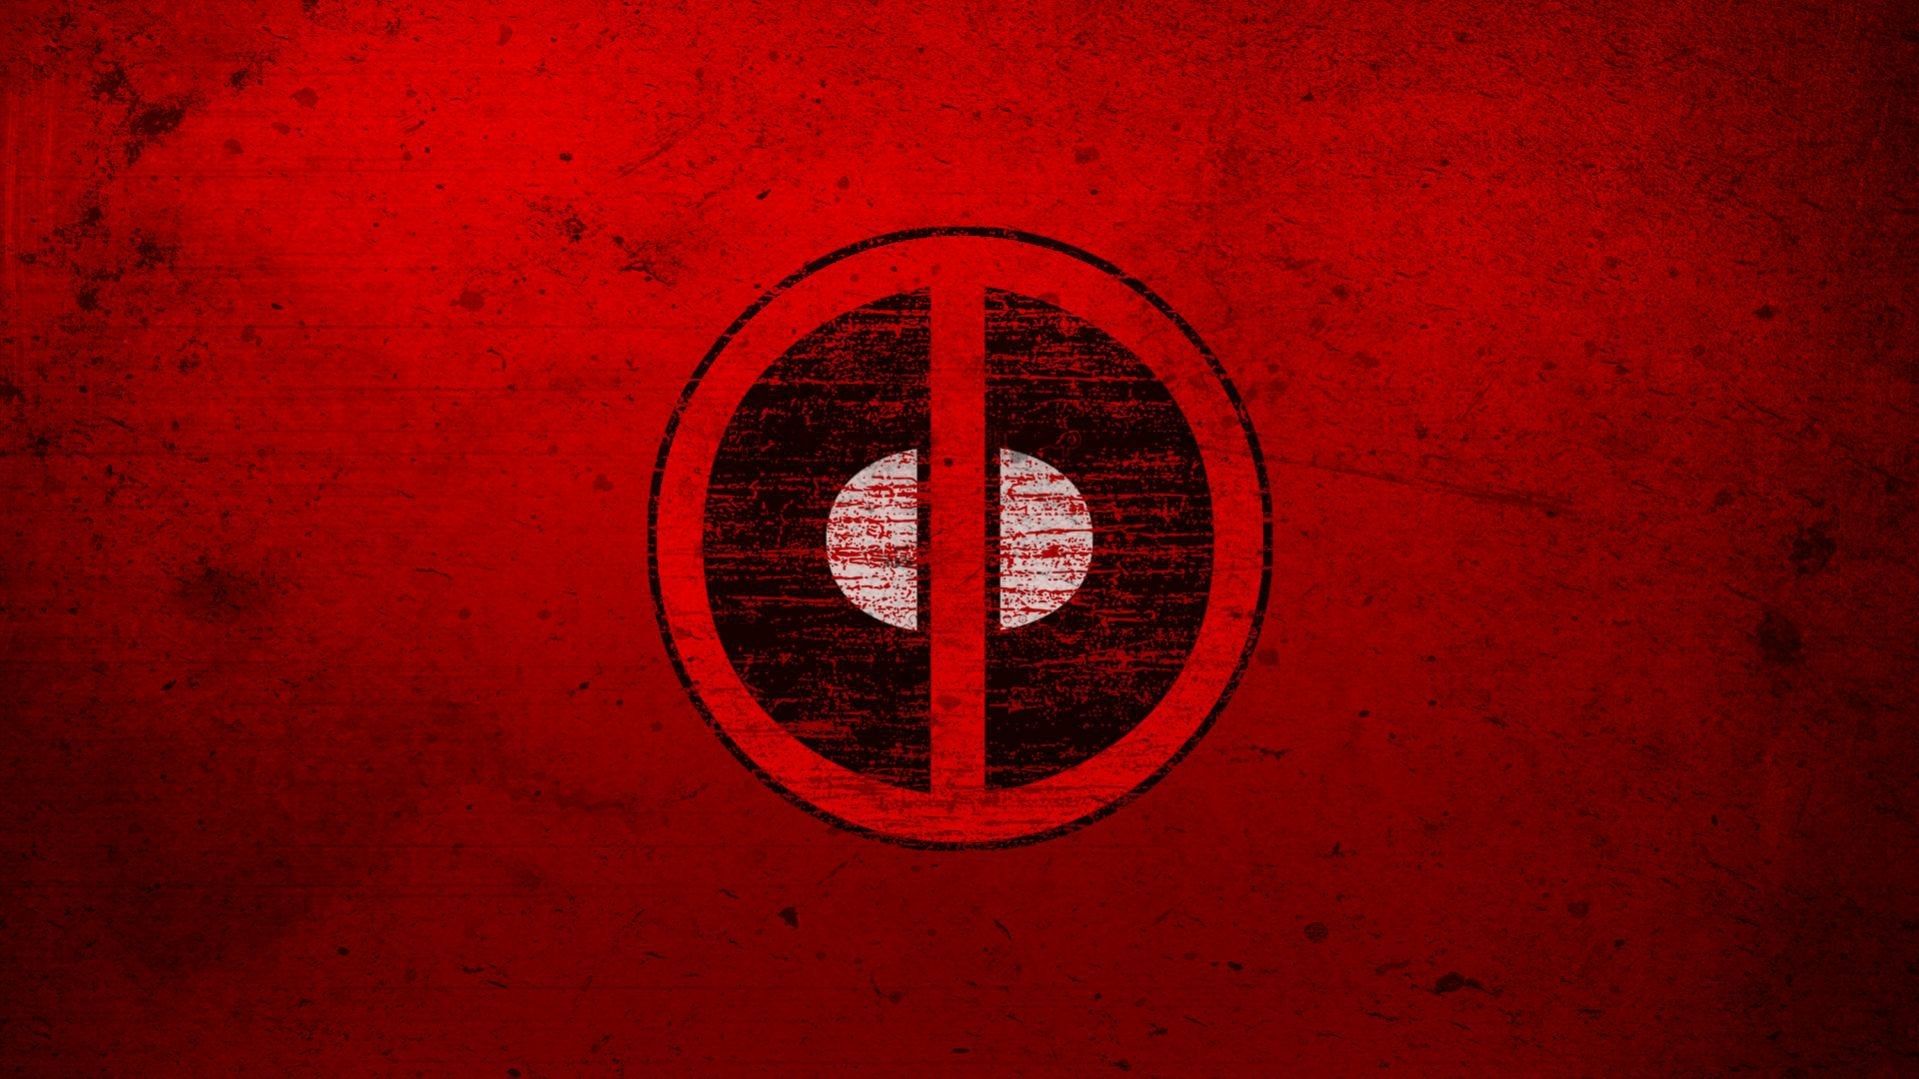 Thought You Guys Might Want This Distressed Deadpool Logo Wallpaper I Made For R ComicWalls